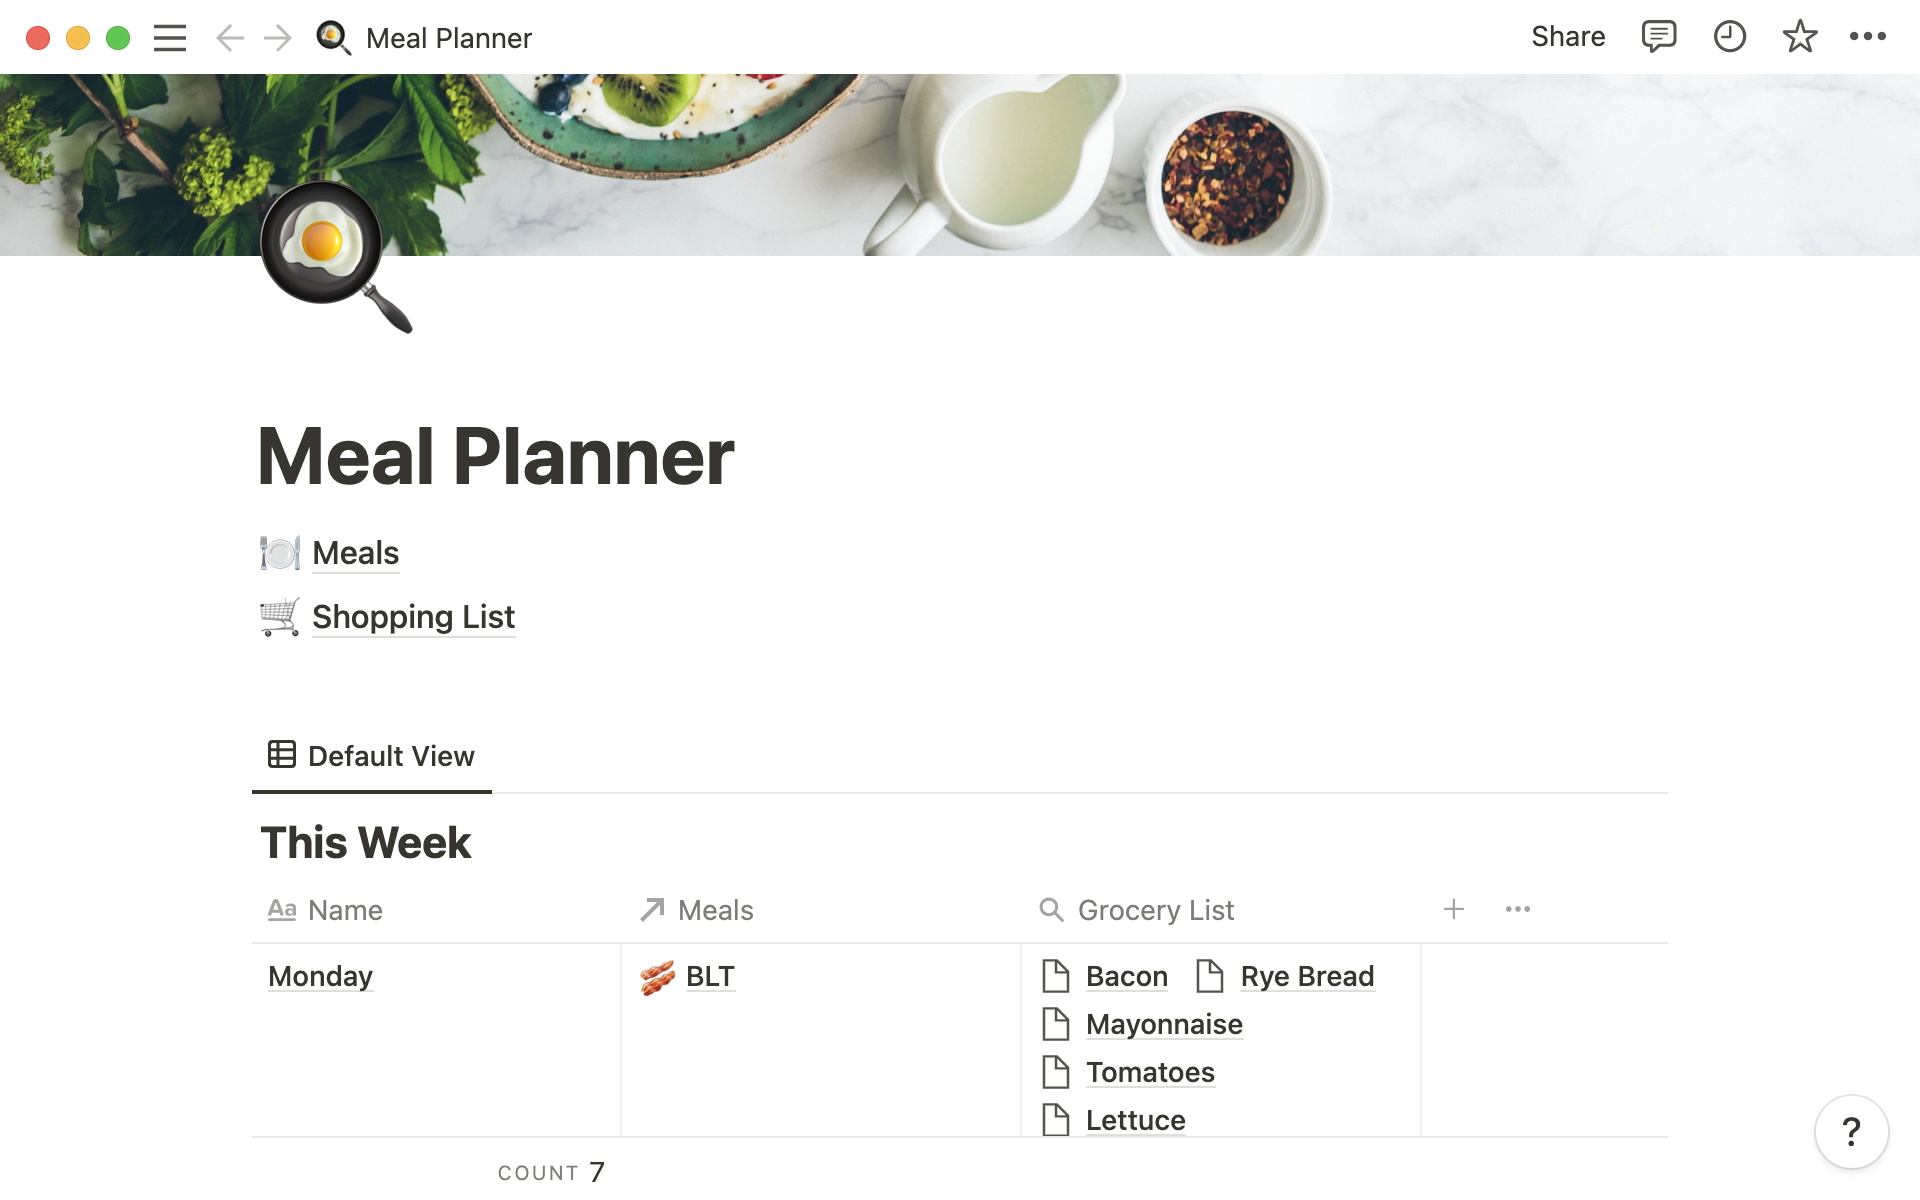 The desktop image for the Meal planner template